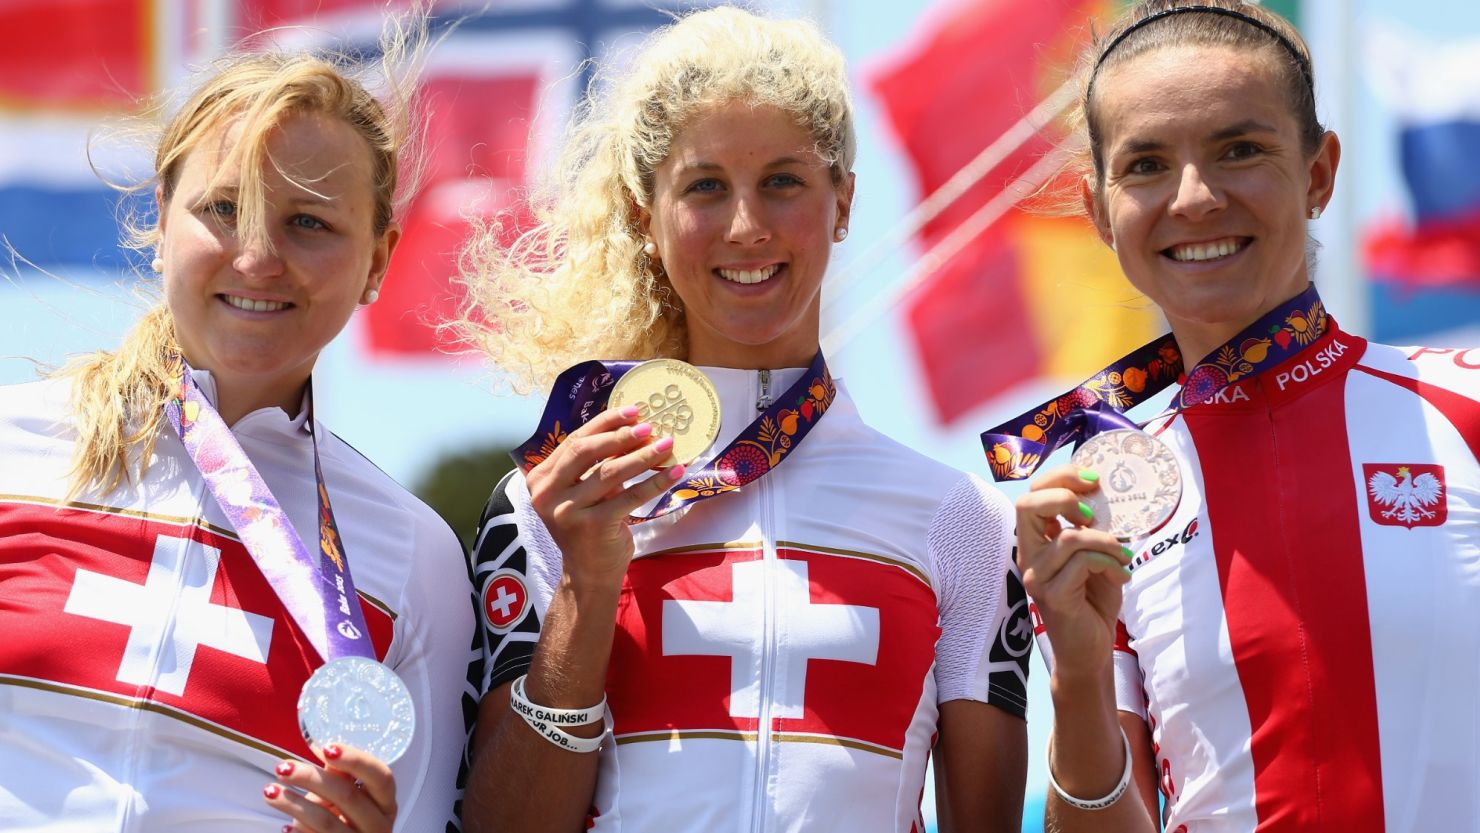 Switzerland's Jolanda Neff, the first gold medal winner at the inaugural European Games, is flanked by the other medalists in the women's mountain bike event.